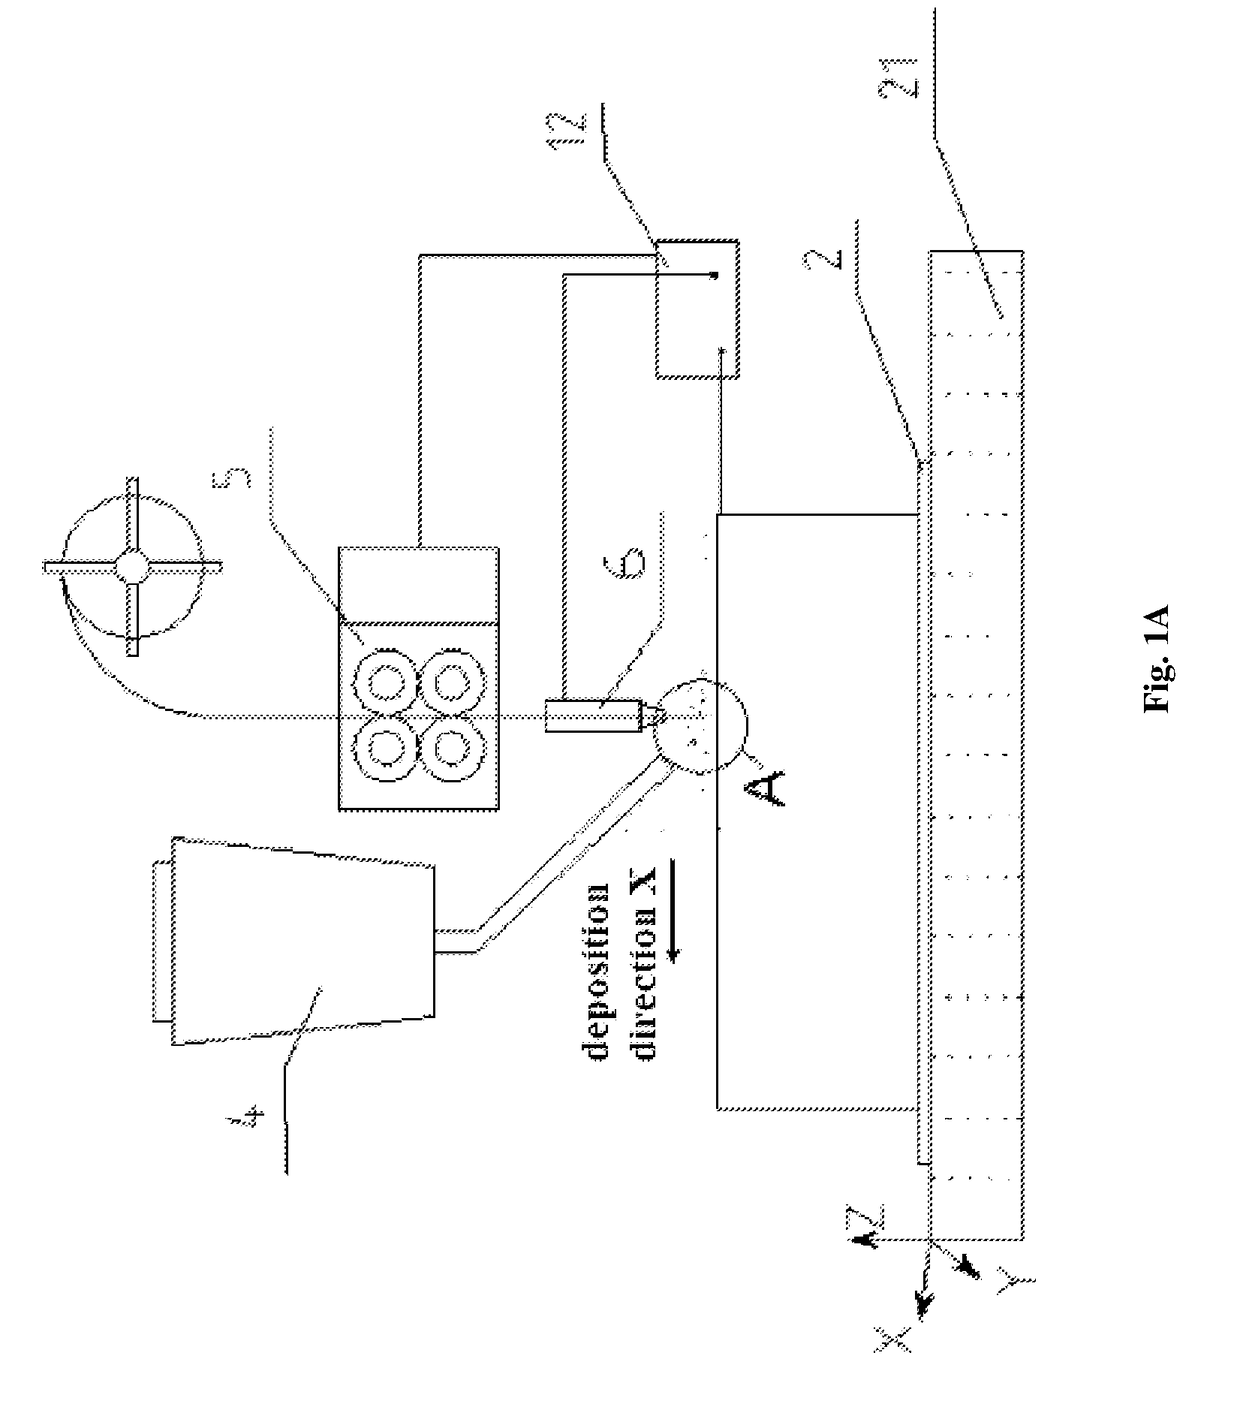 Electric melting method for forming metal components